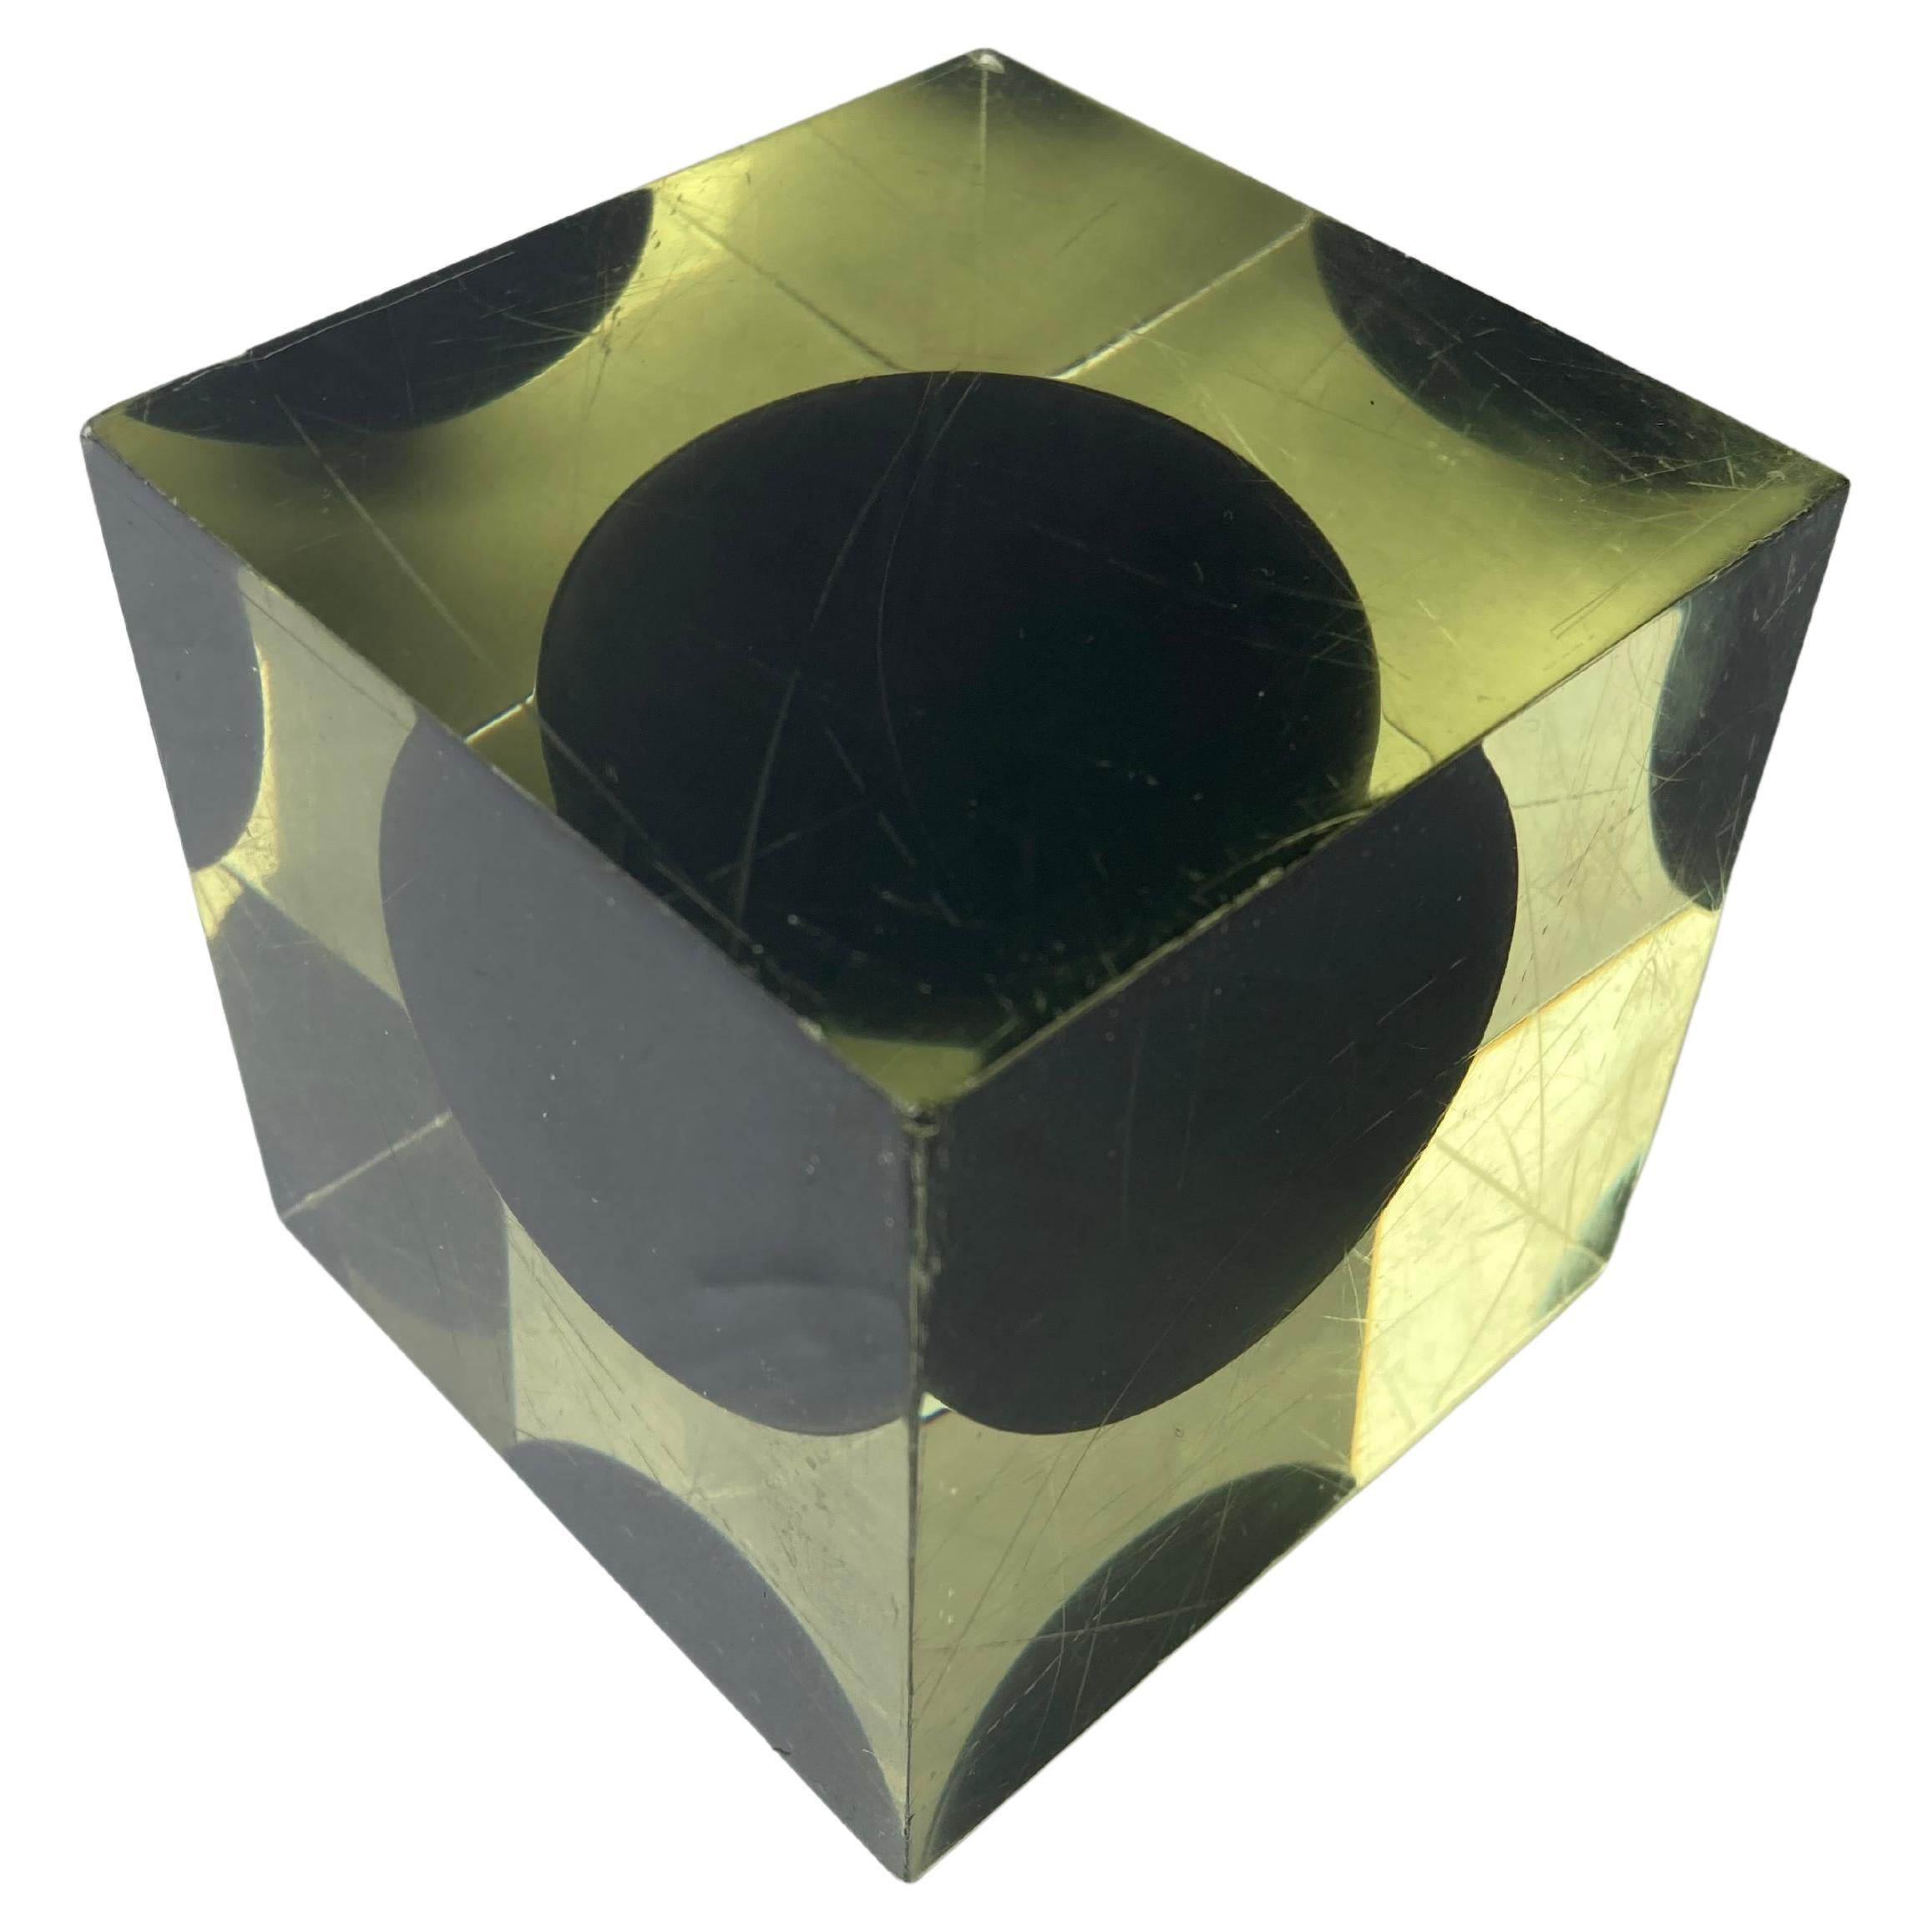 Enzo Mari, Rare Cube Resin with Black Ball Sphere, Sculpture/Paperweight